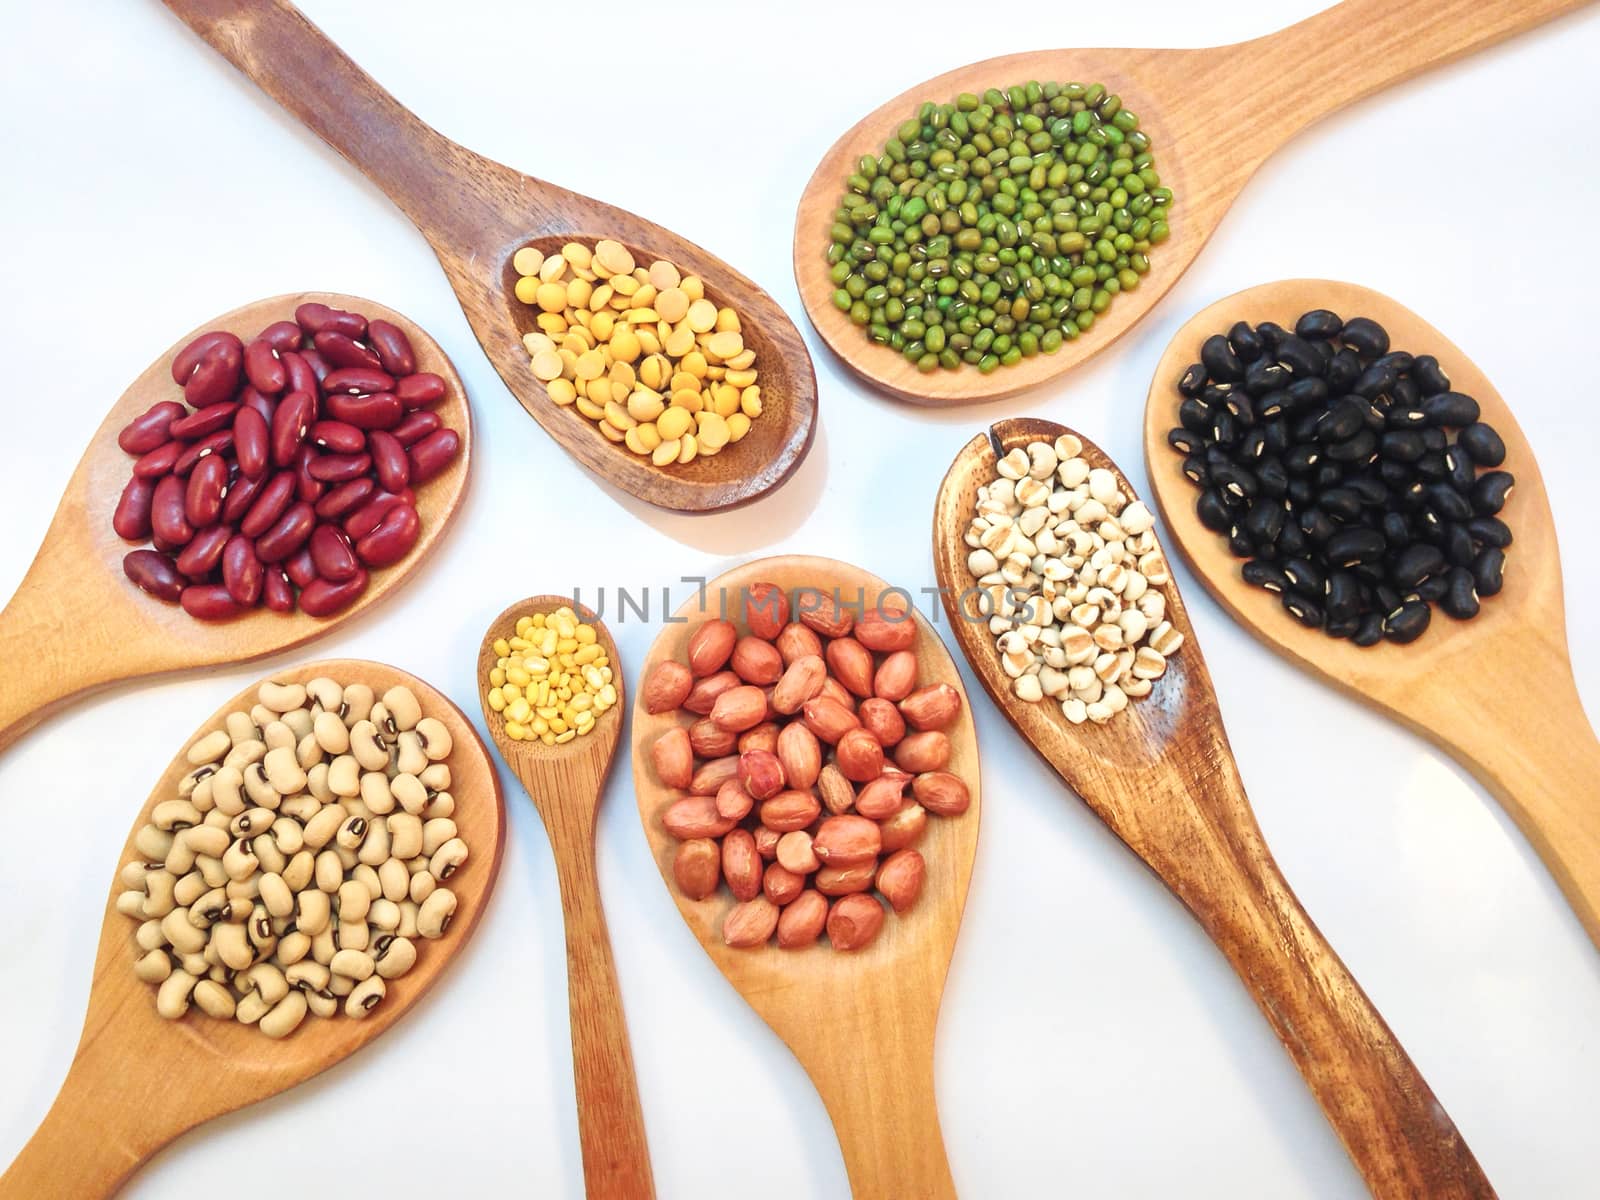 Varieties of beans, peas on white background by Bowonpat